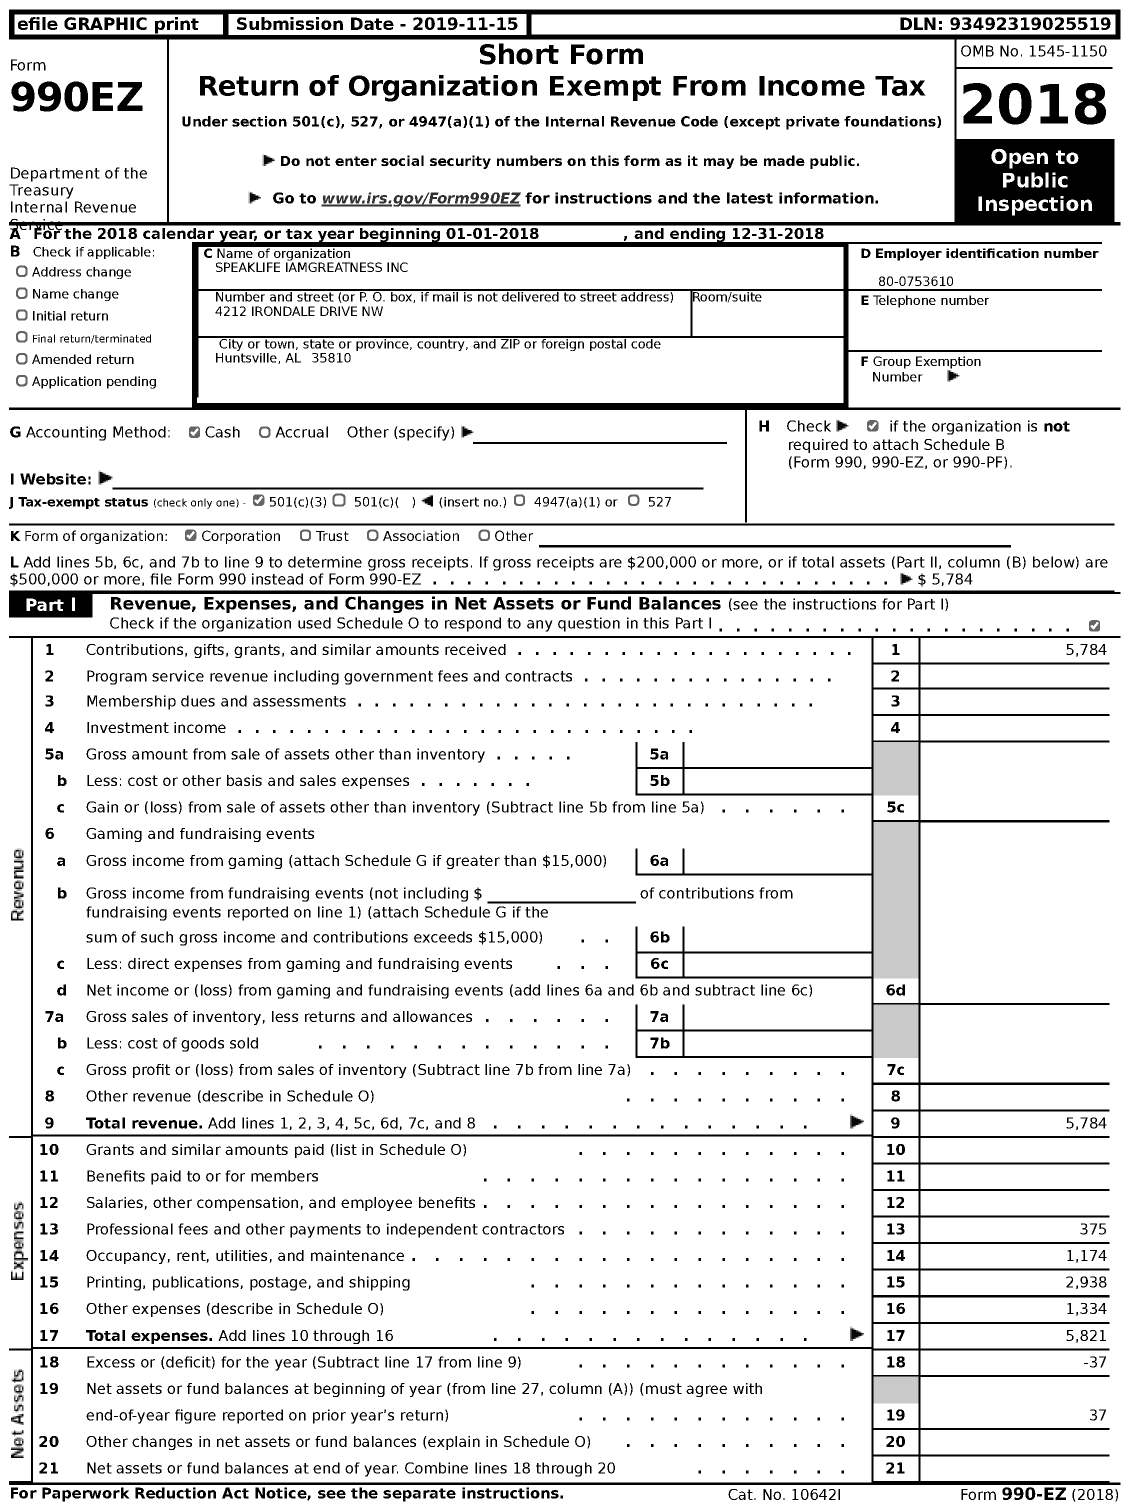 Image of first page of 2018 Form 990EZ for Speaklife Iamgreatness